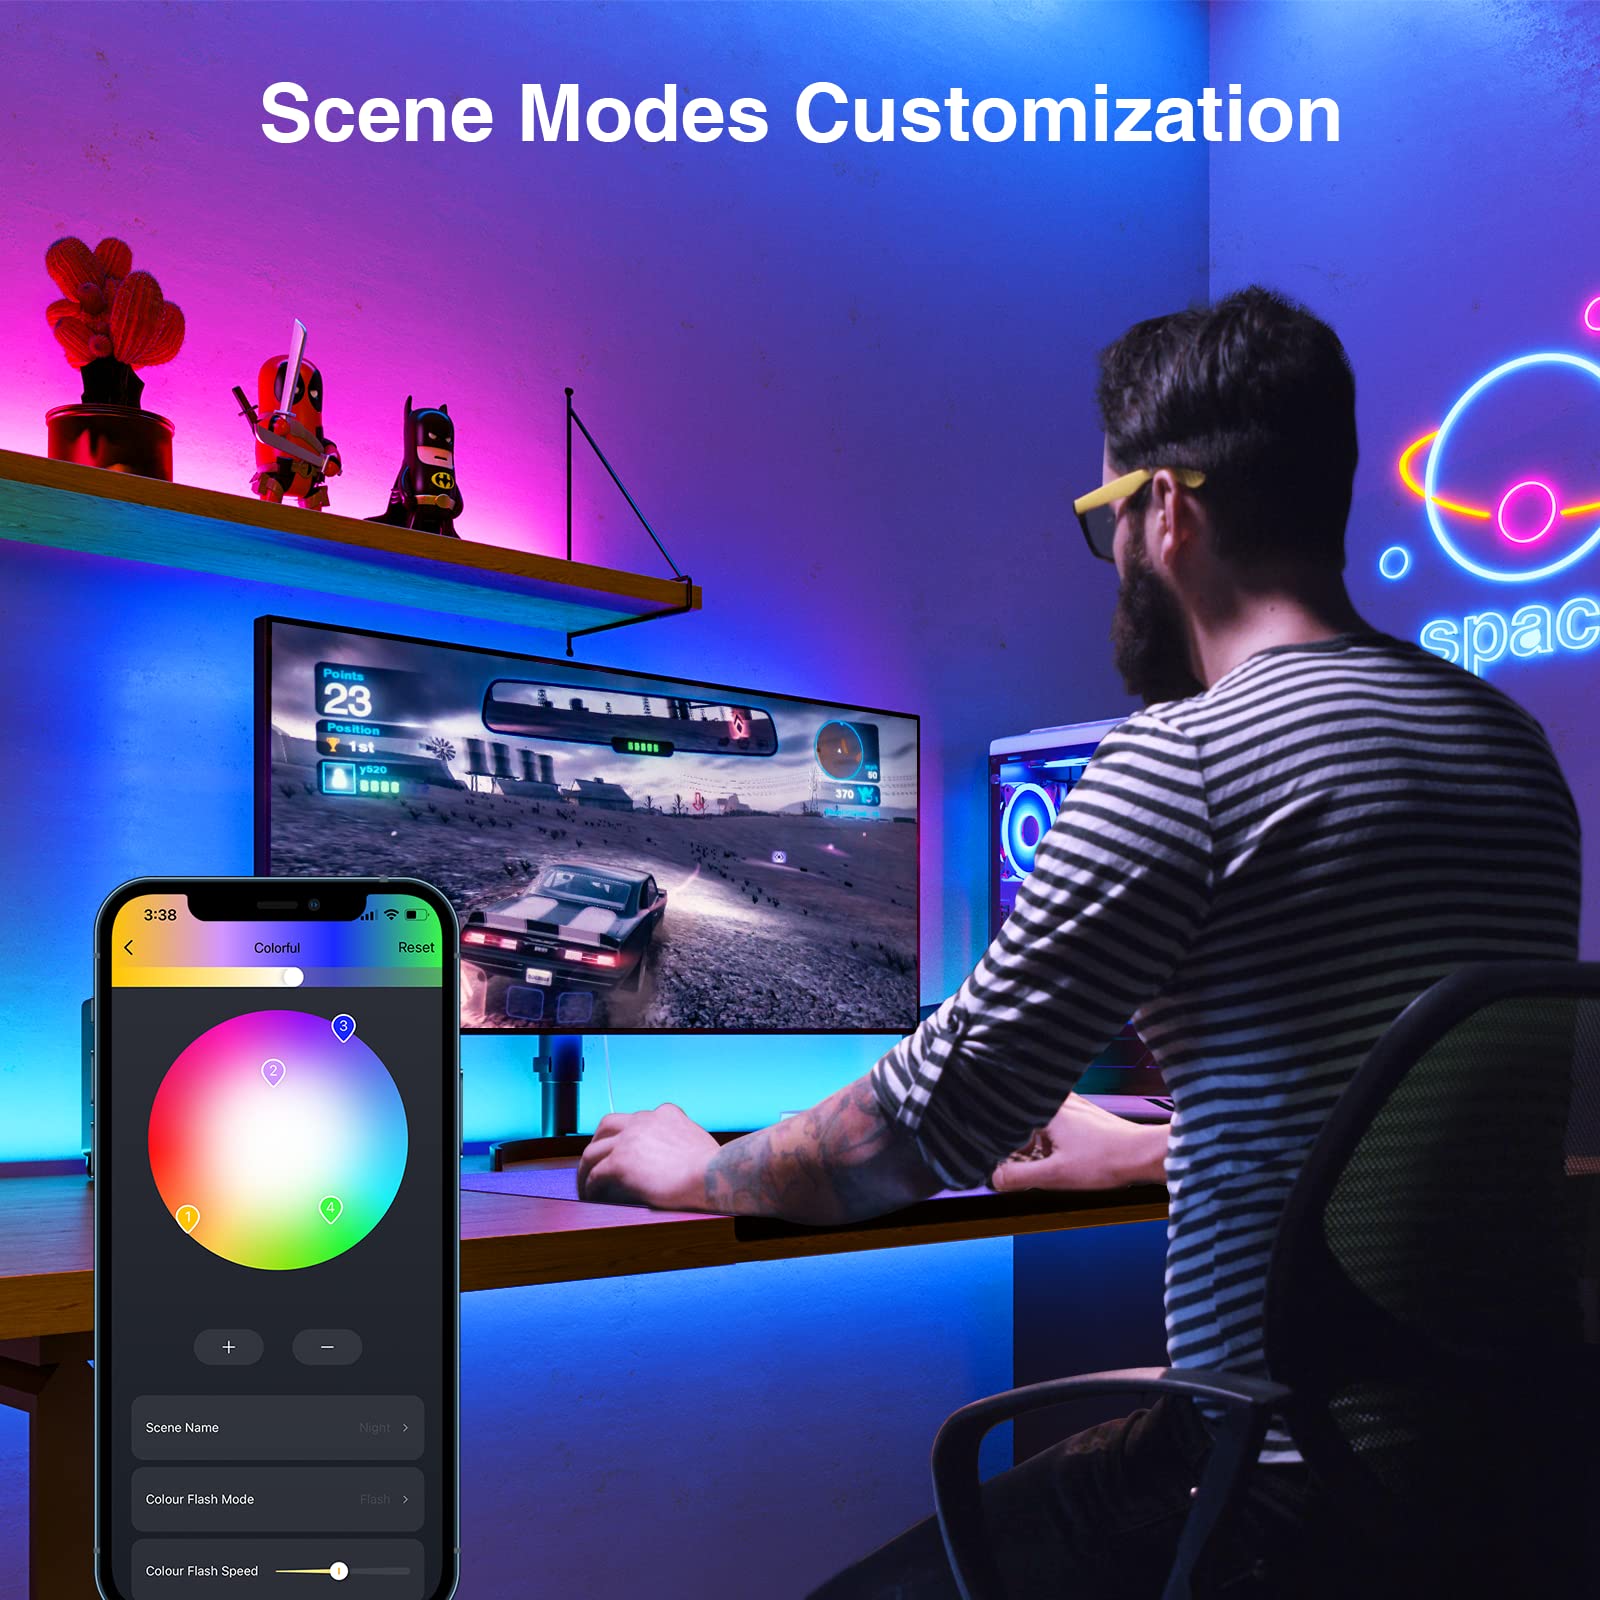 GHome Smart SL1 TV LED Backlight, Smart WiFi Strip Light Compatible with Alexa and Google Home, App Control, Music Sync 16 Million Rgb Red Green Blue 9.2Ft ST1-B